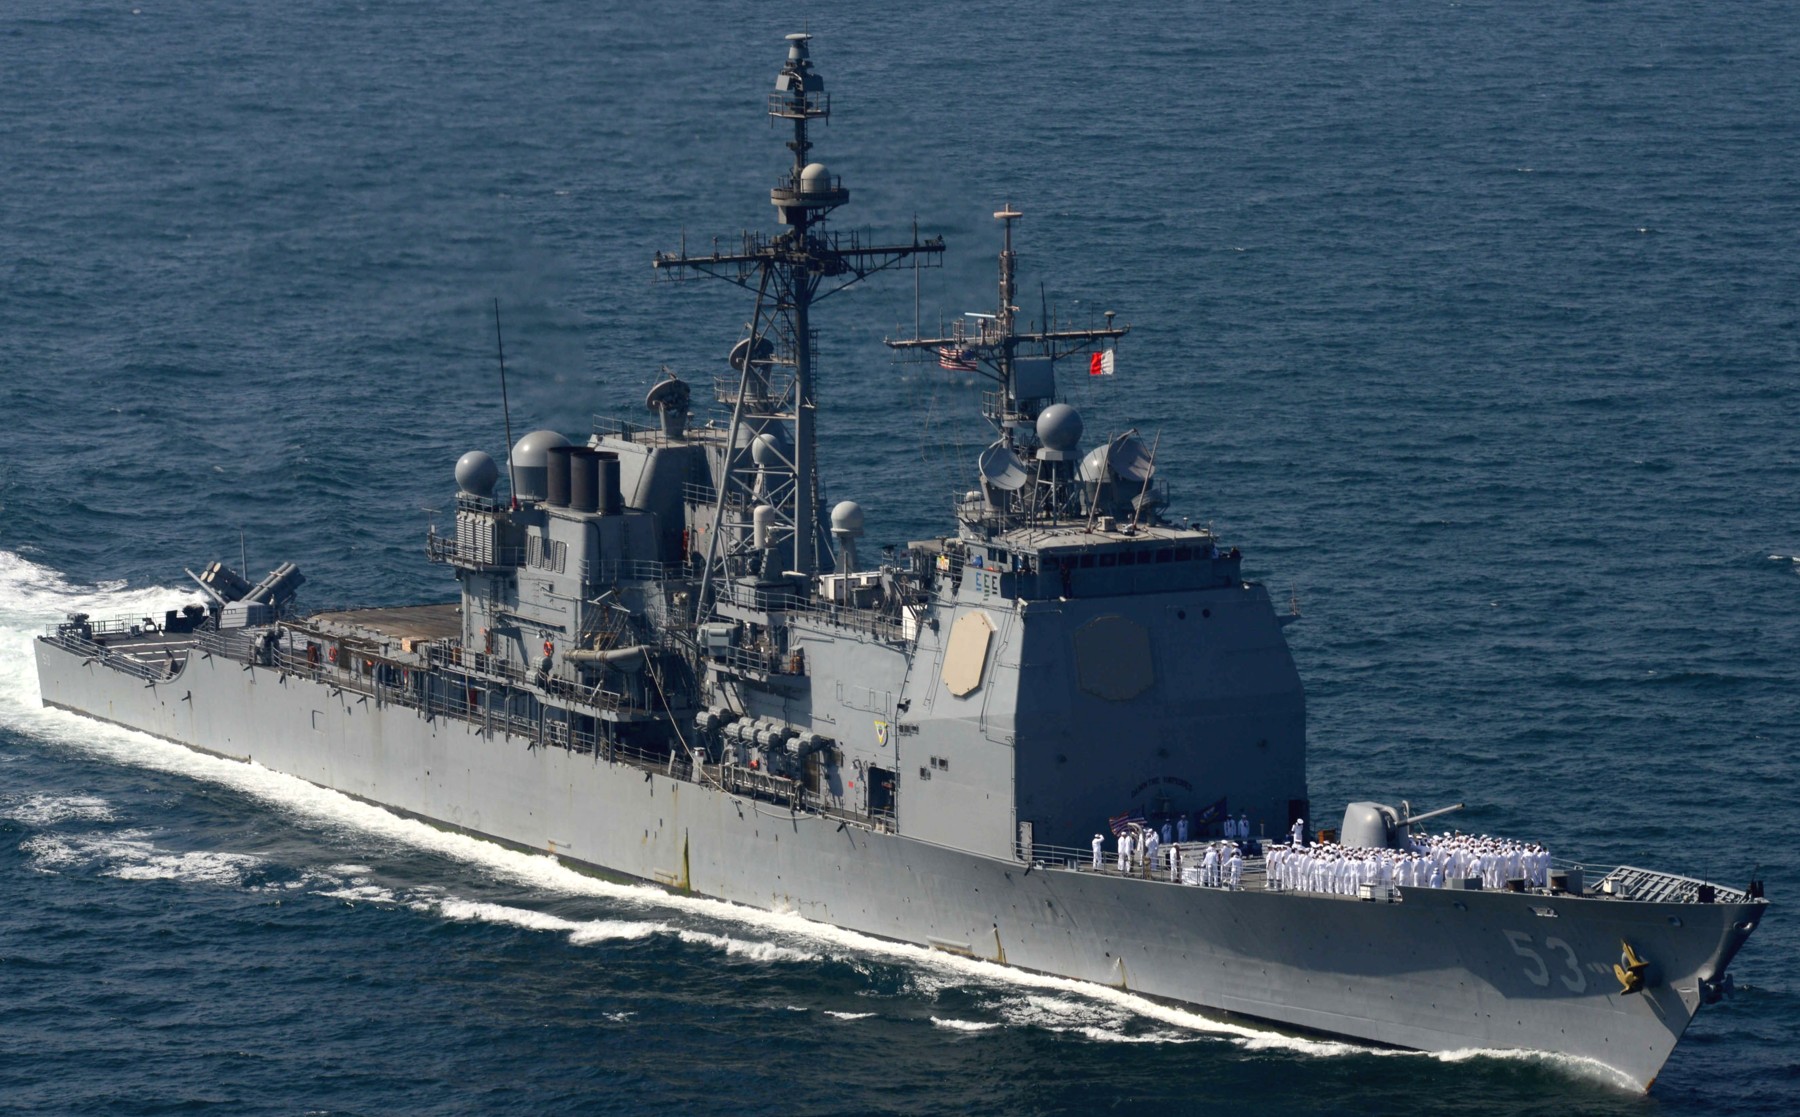 cg-53 uss mobile bay ticonderoga class guided missile cruiser aegis us navy 69